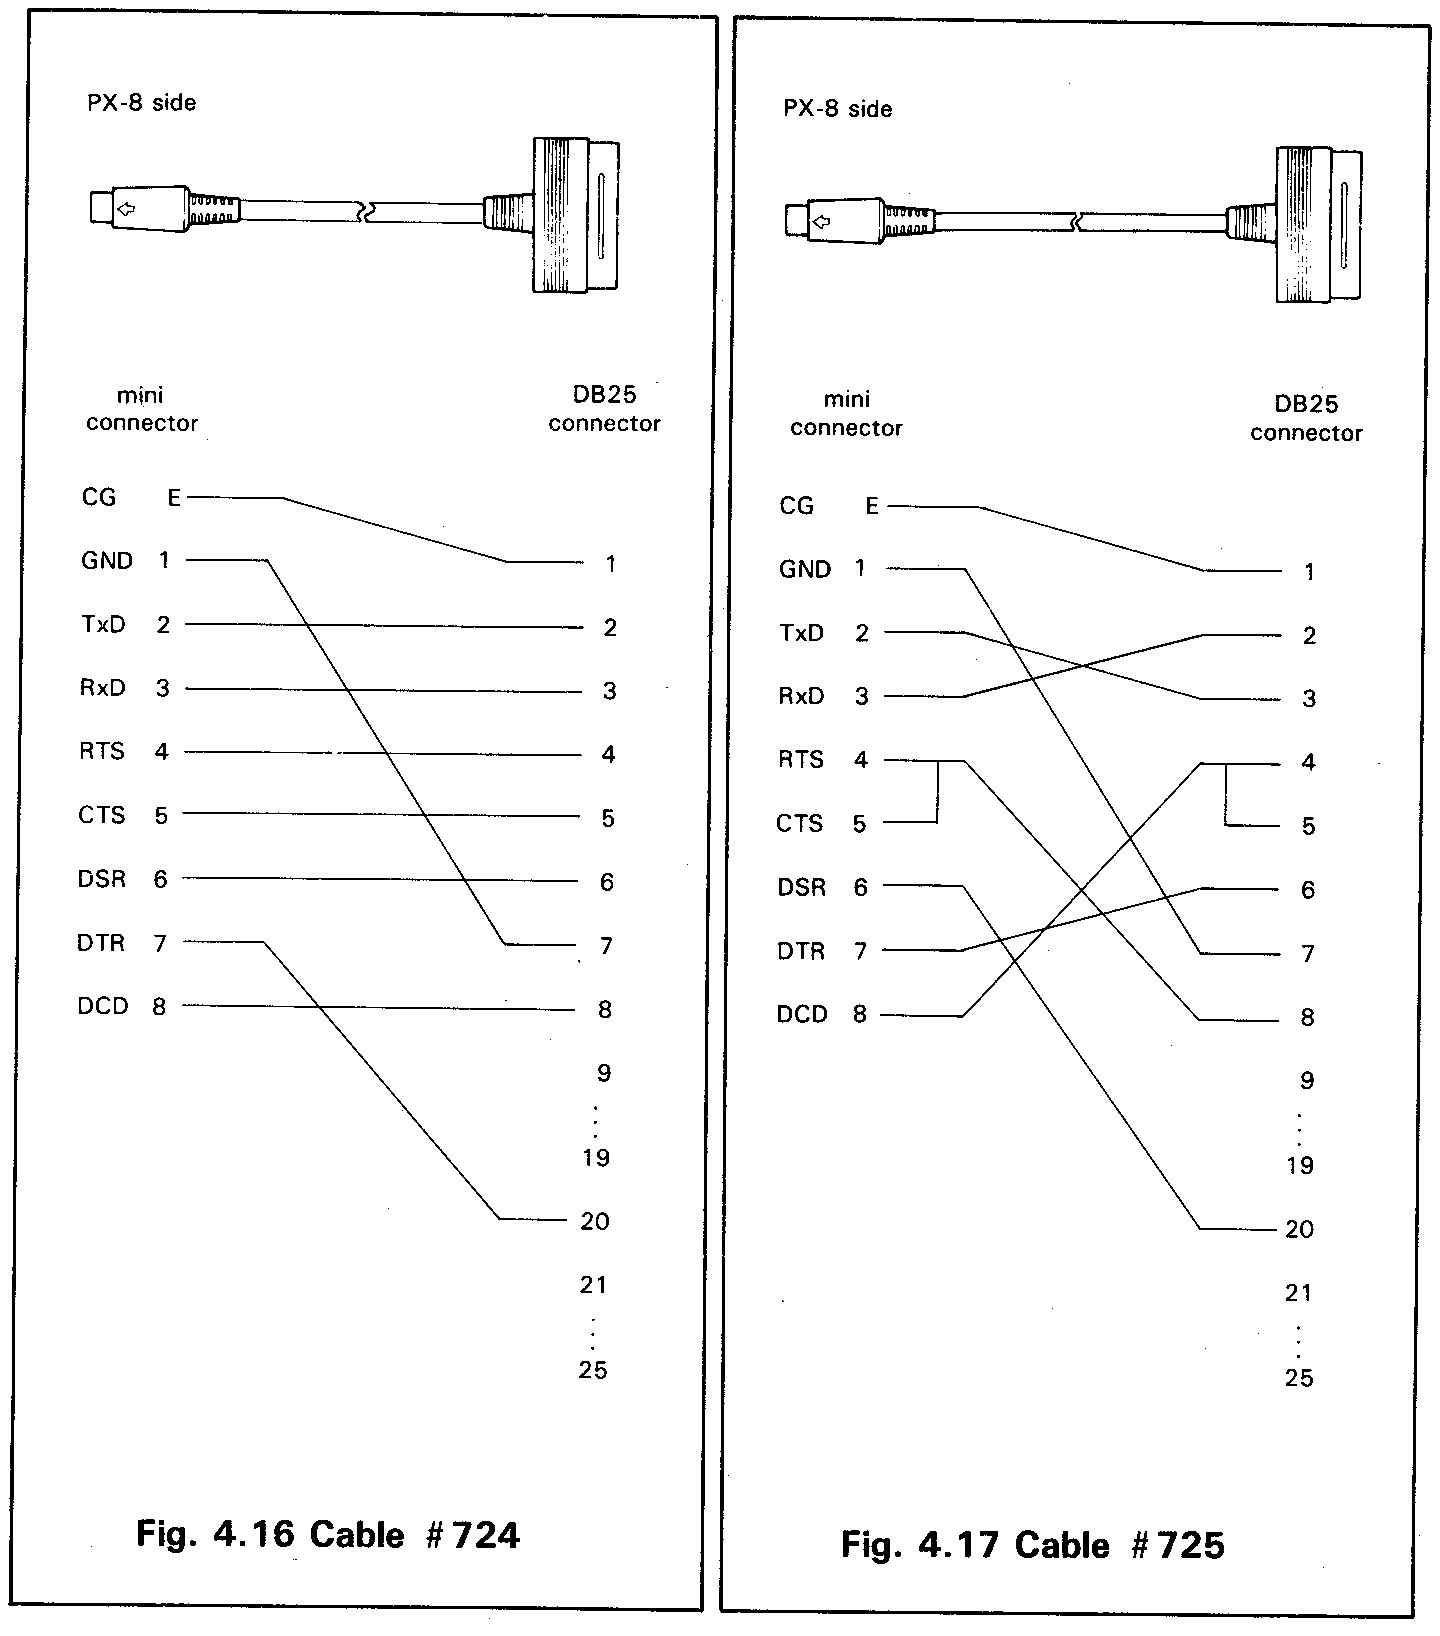 Fig. 4.16 Cable # 724 & Fig. 4.17 Cable # 725